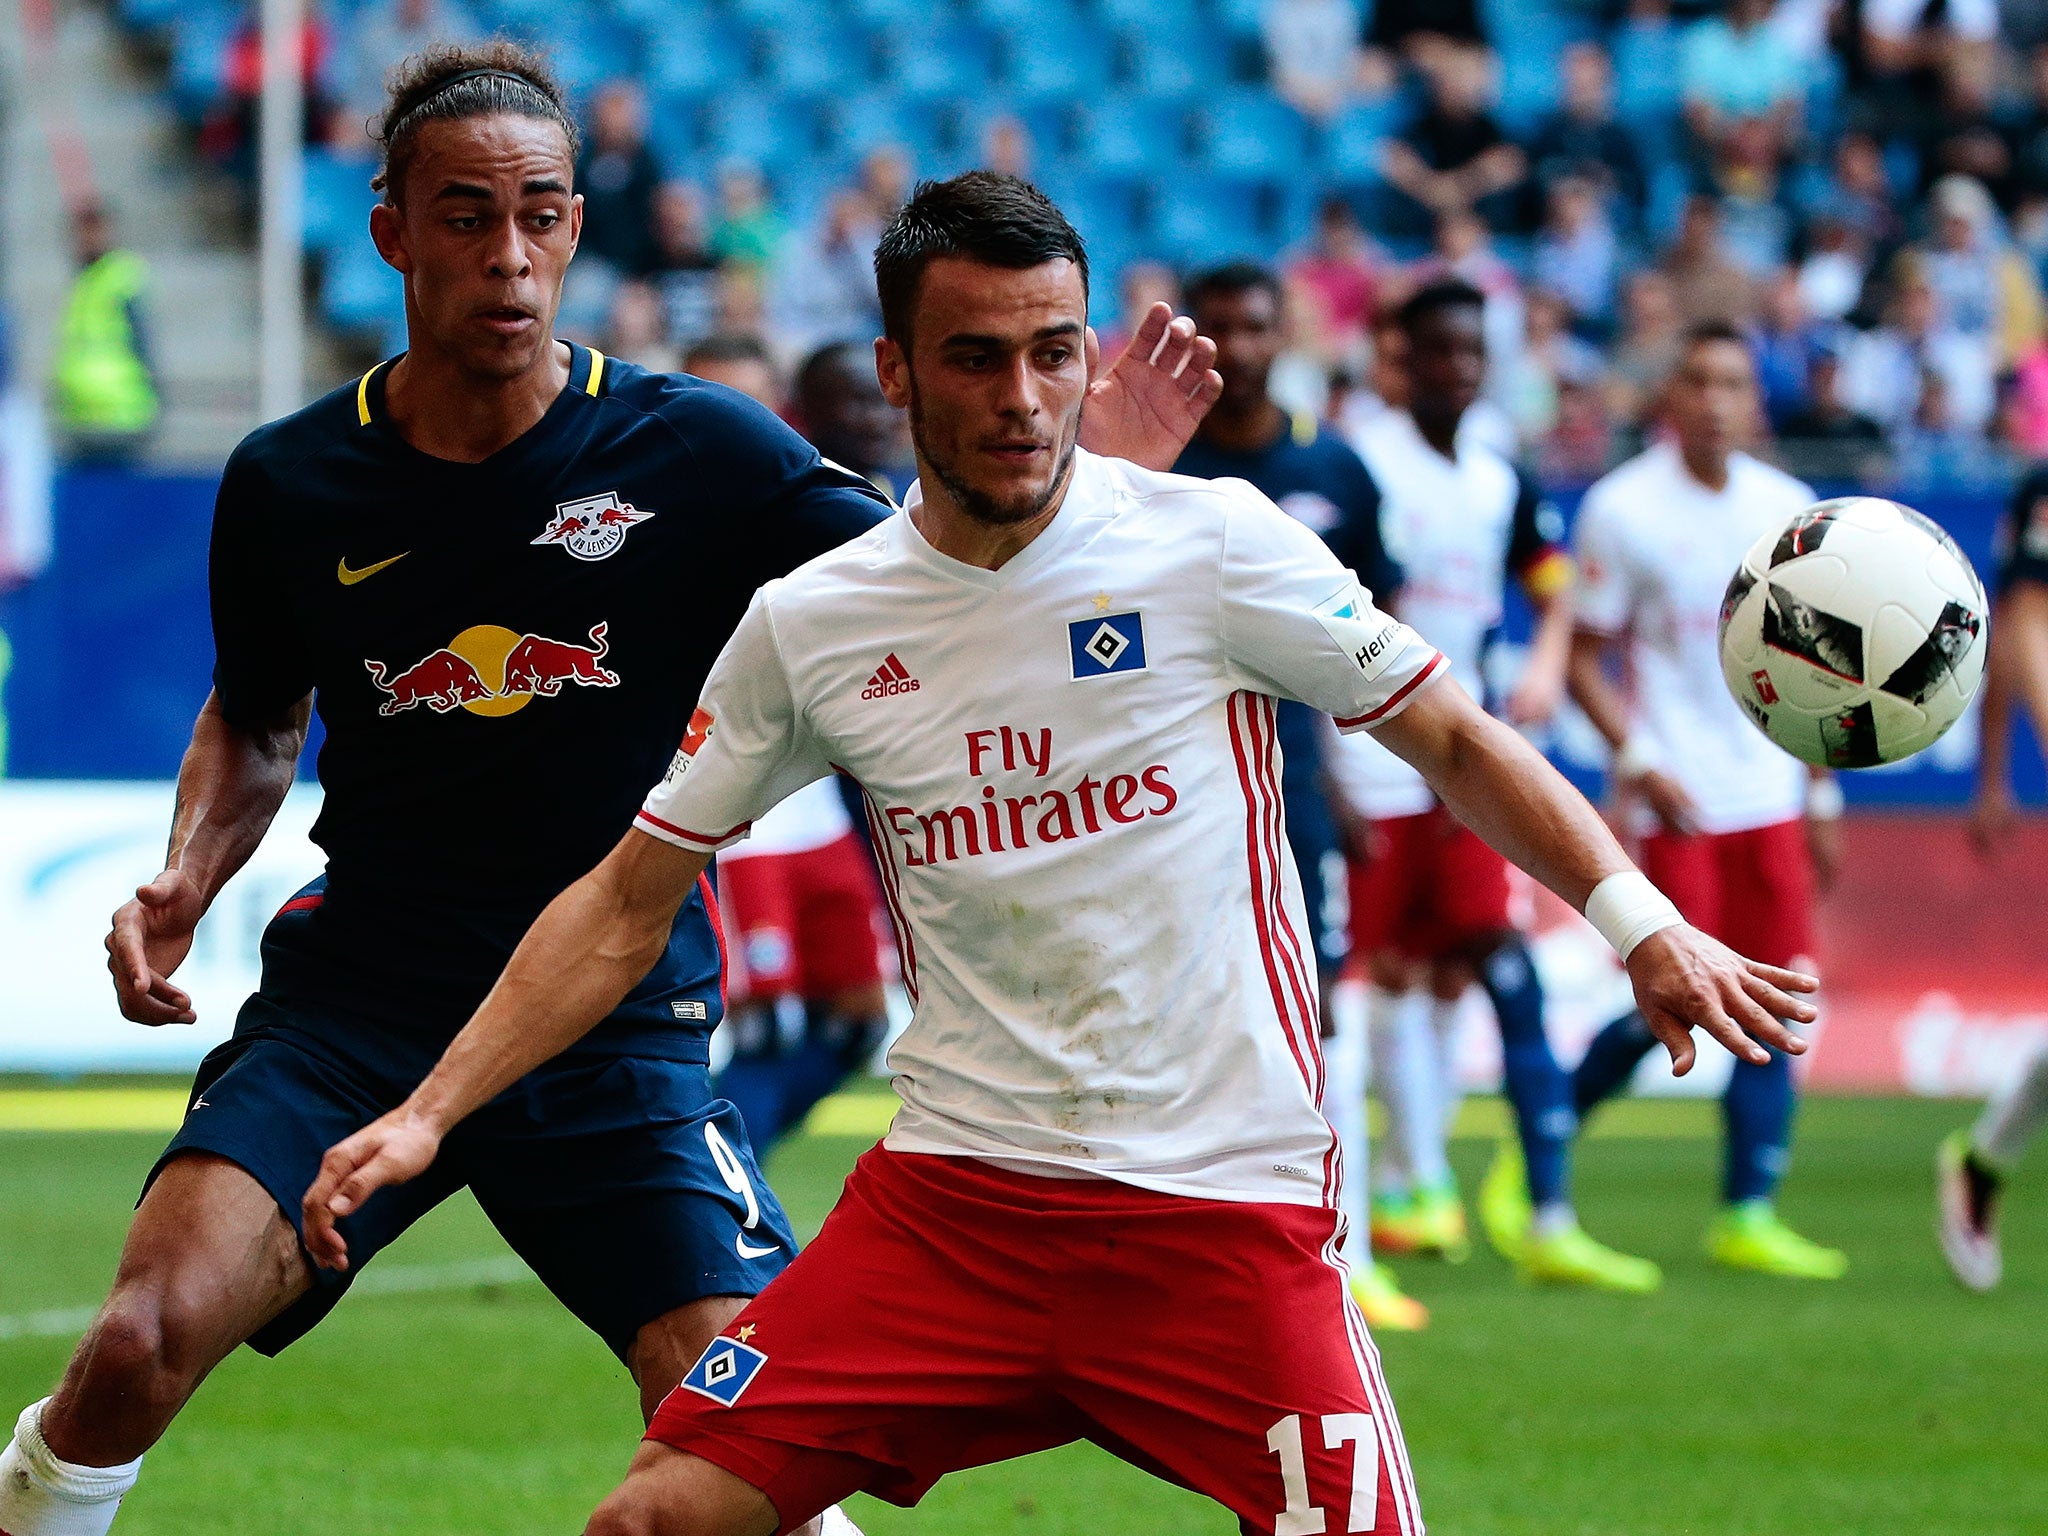 Kostic has been billed as Serbia's next big thing